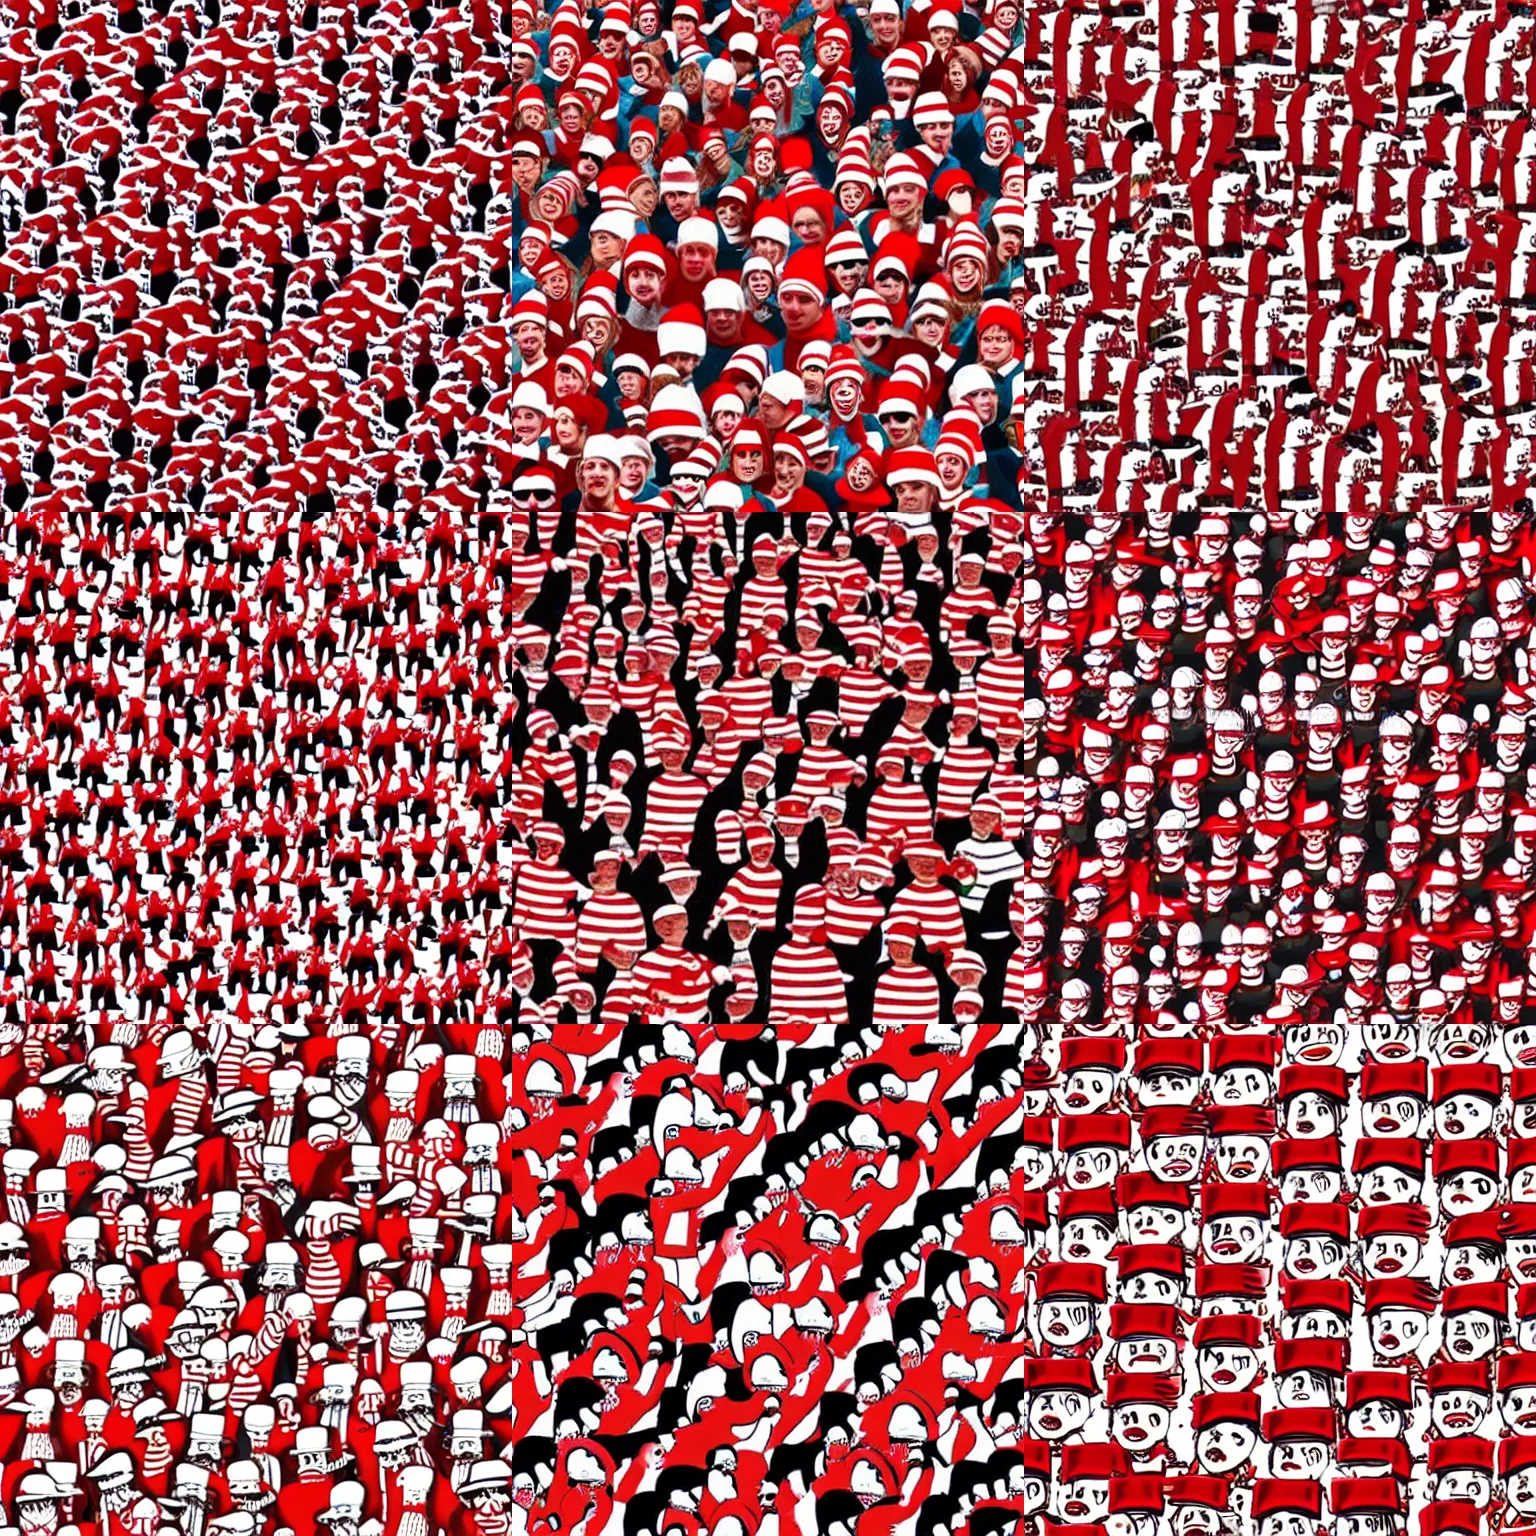 Prompt: where's waldo illustration with a sea of thousands of look - alikes wearing red and white stripped clothing and hats